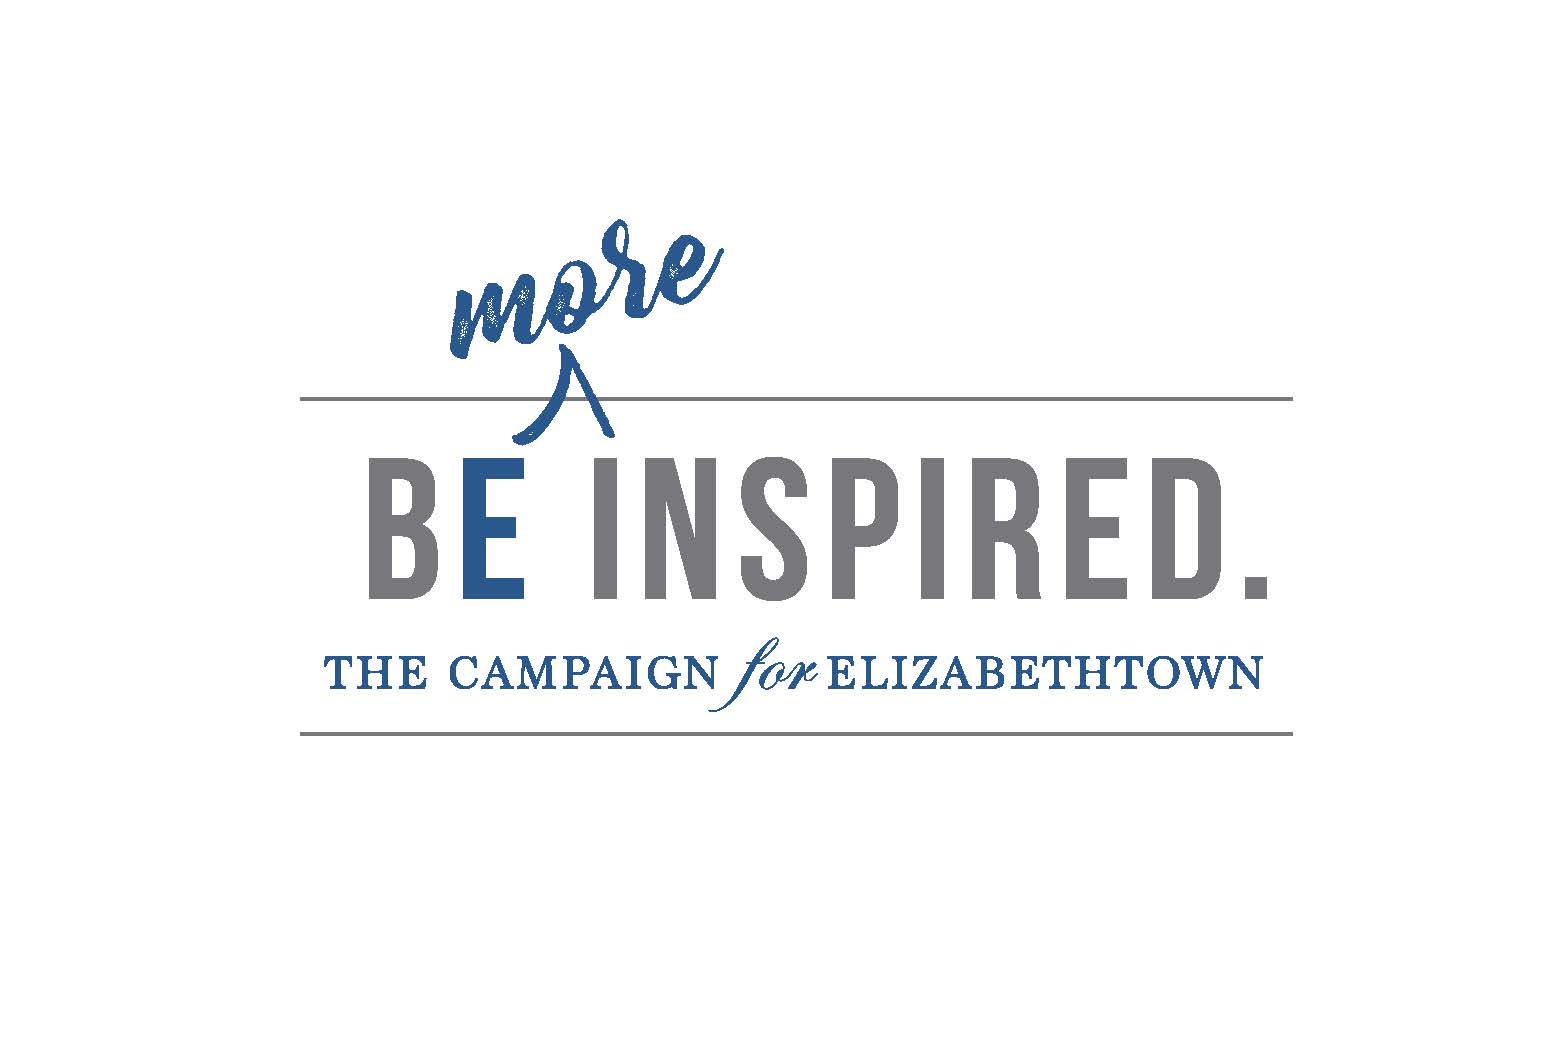 BE INSPIRED. campaign goal increased to $60 million